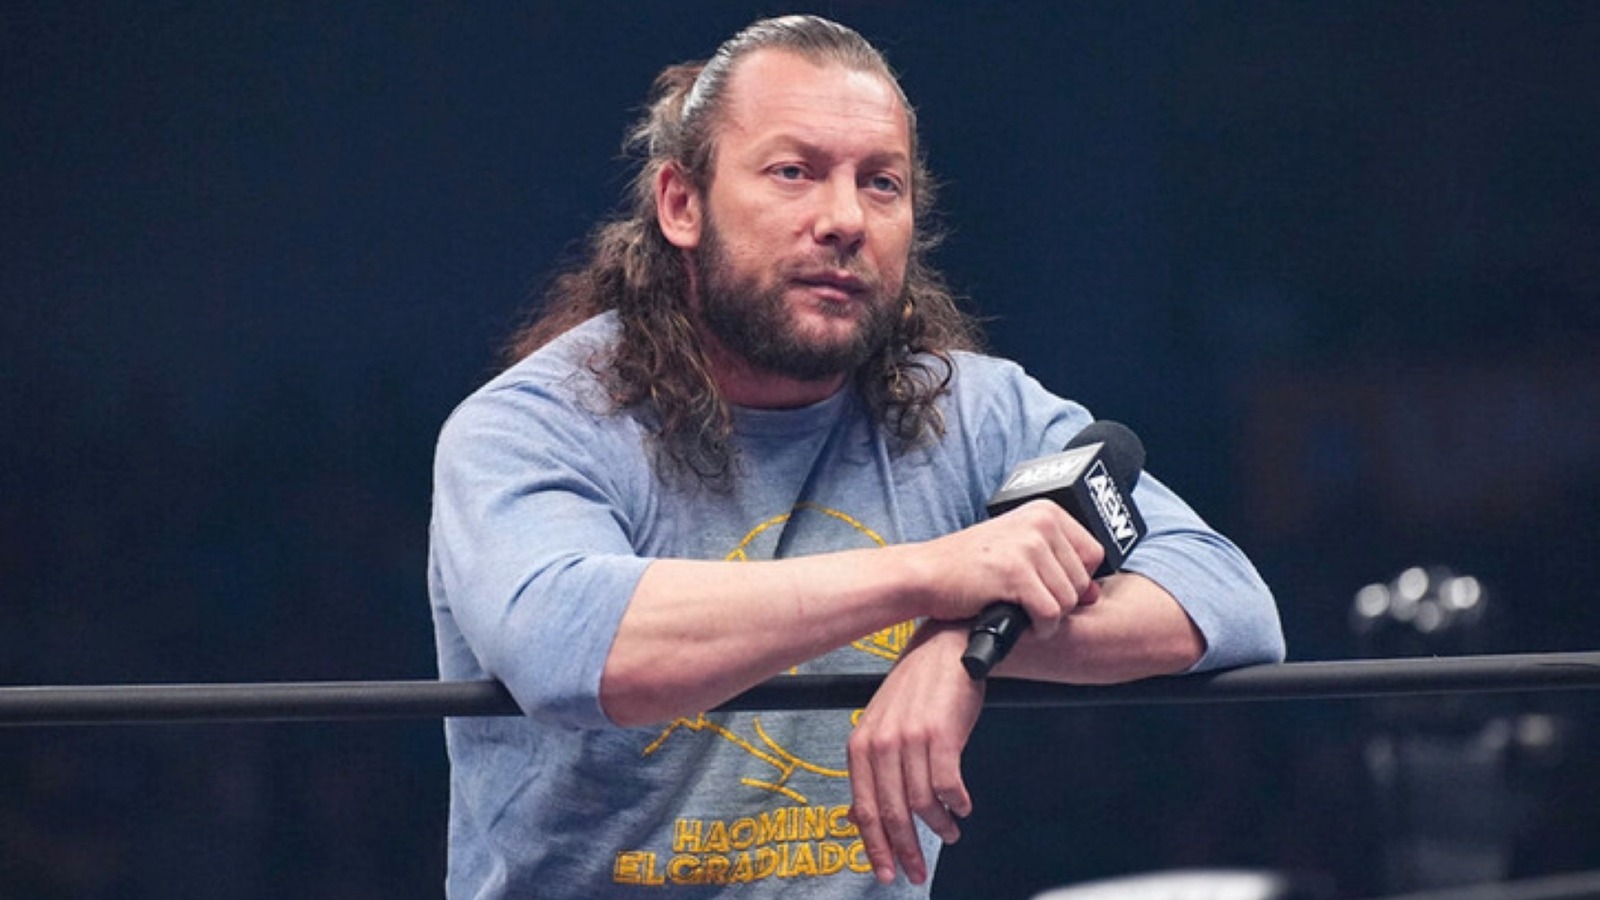 AEW's Kenny Omega On Working For Marigold Boss Rossy Ogawa: 'I Would Be Very Hesitant'